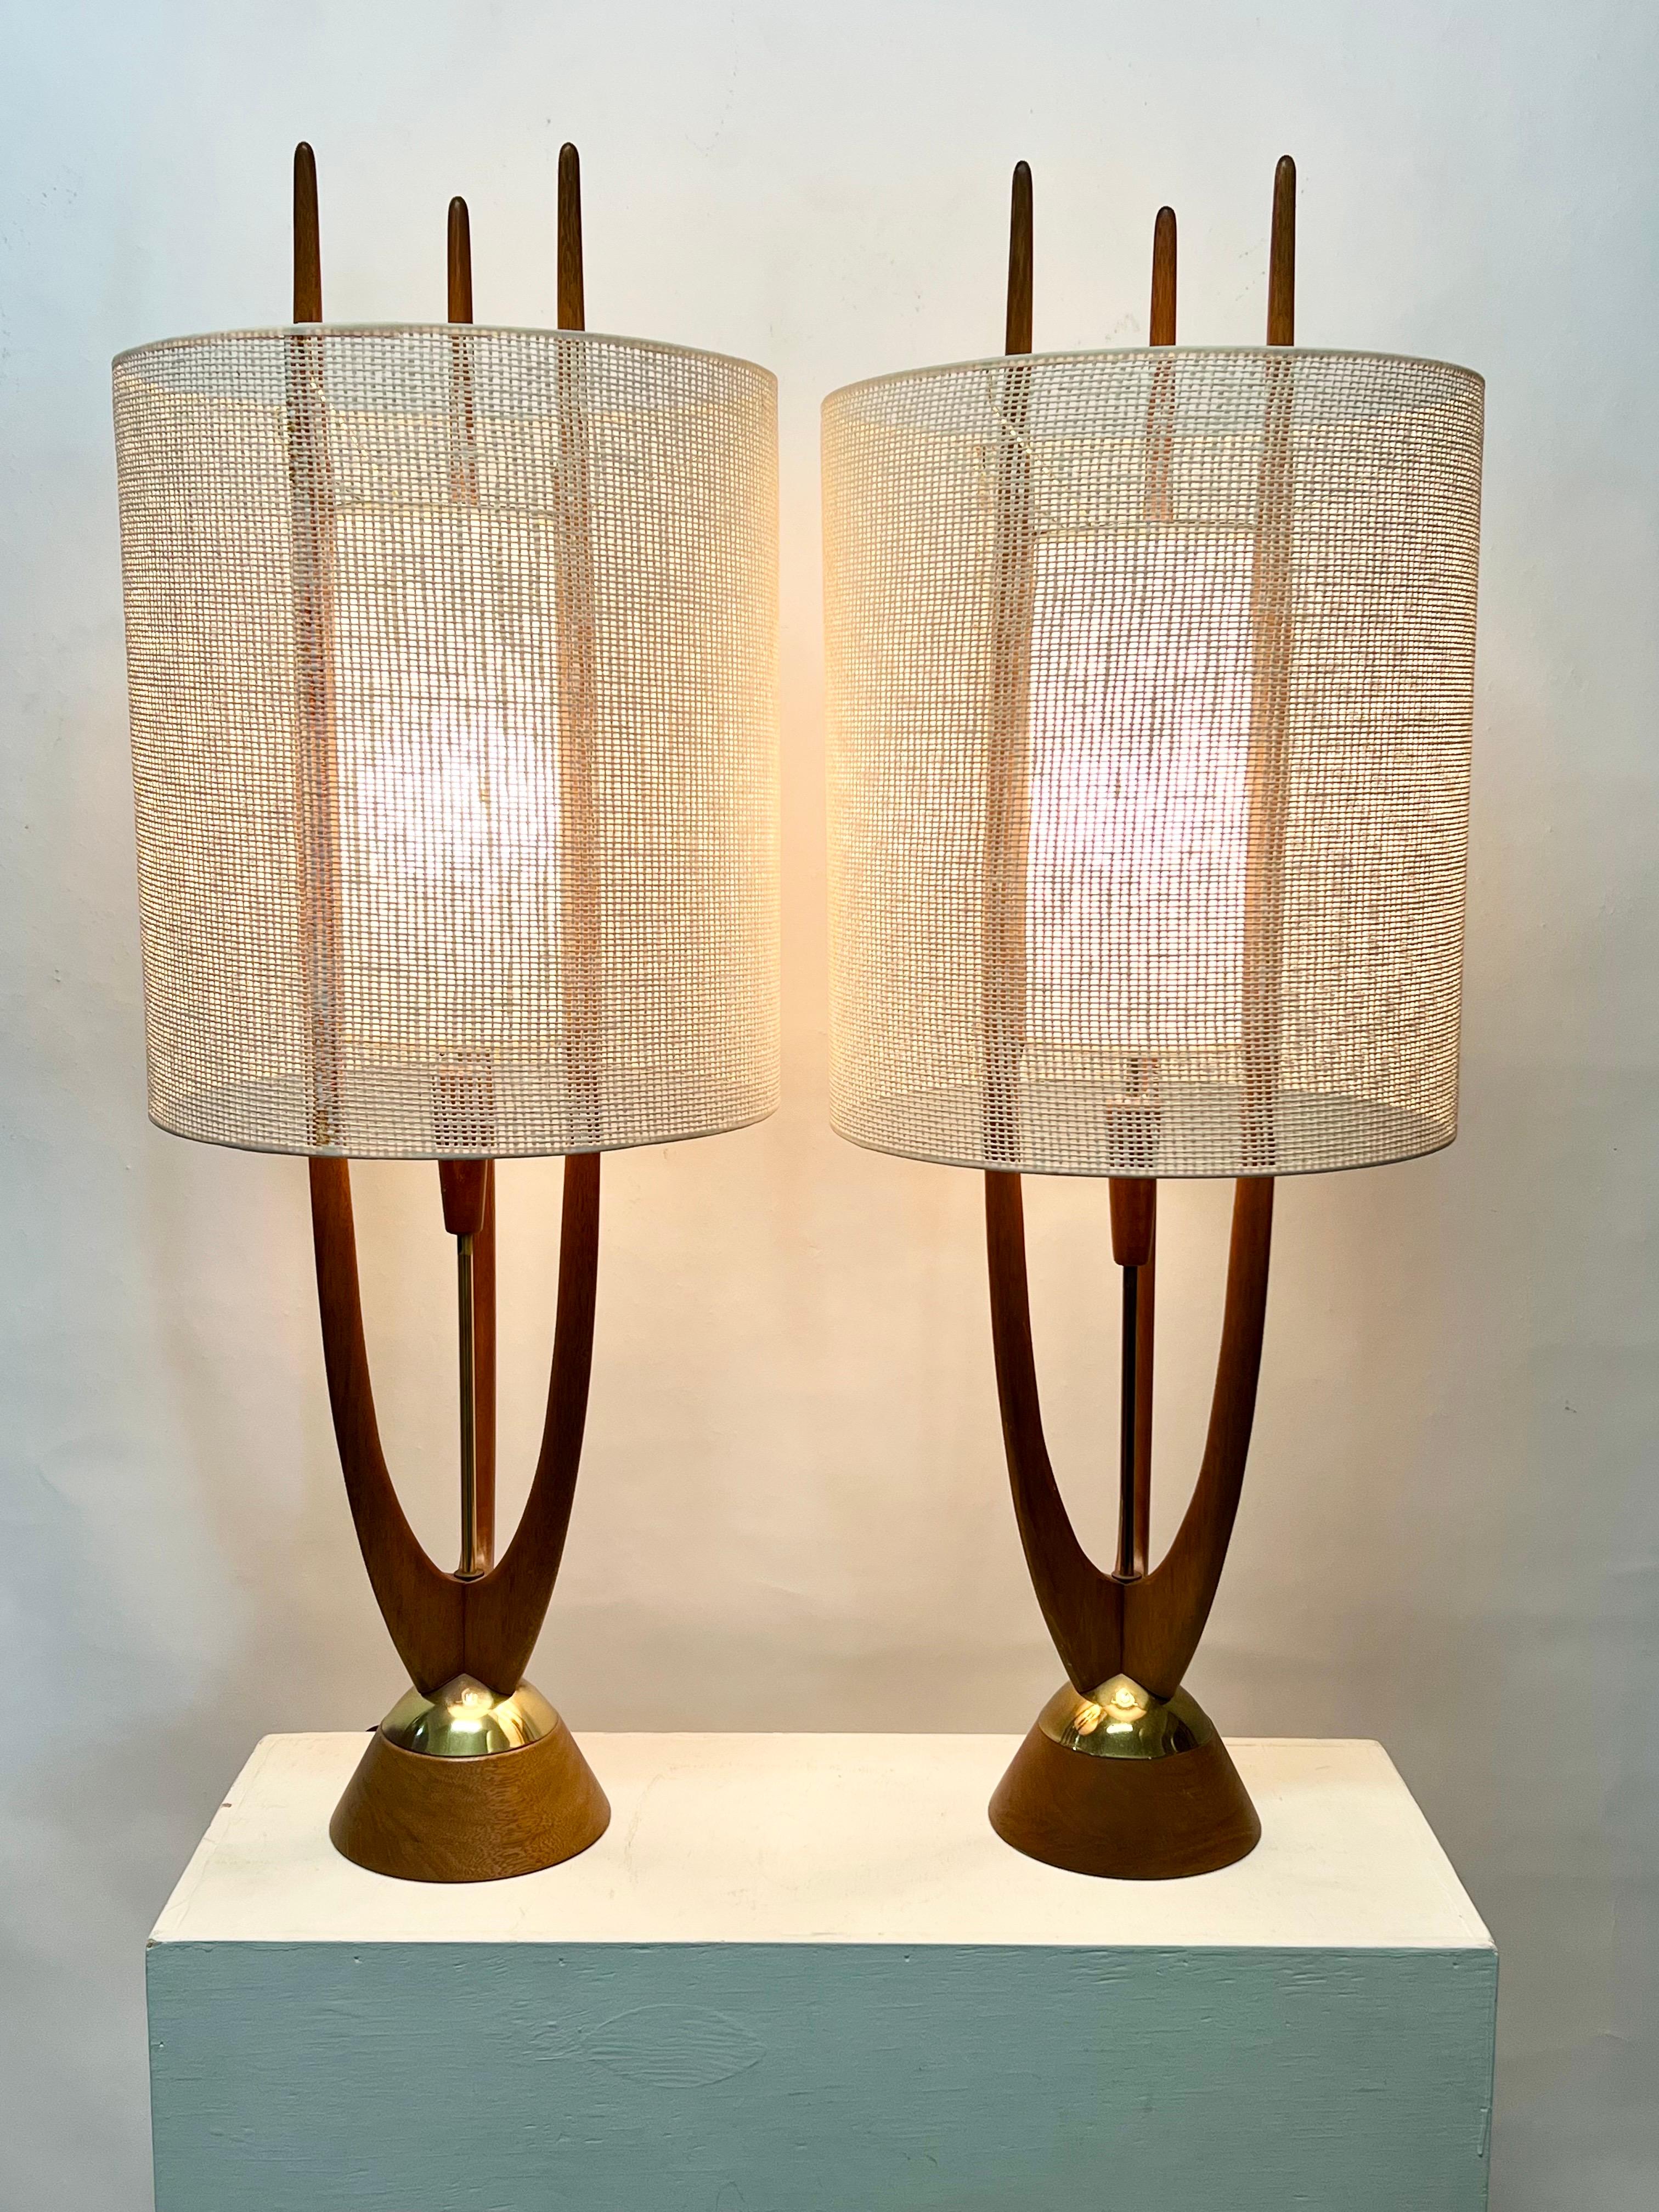 Fantastic pair of rare table lamps by American designer, John Keal c1960s. All original condition, wonderful patina, with original shades. Typically the original outer shades are missing from these lamps. They can be used with or without the outer